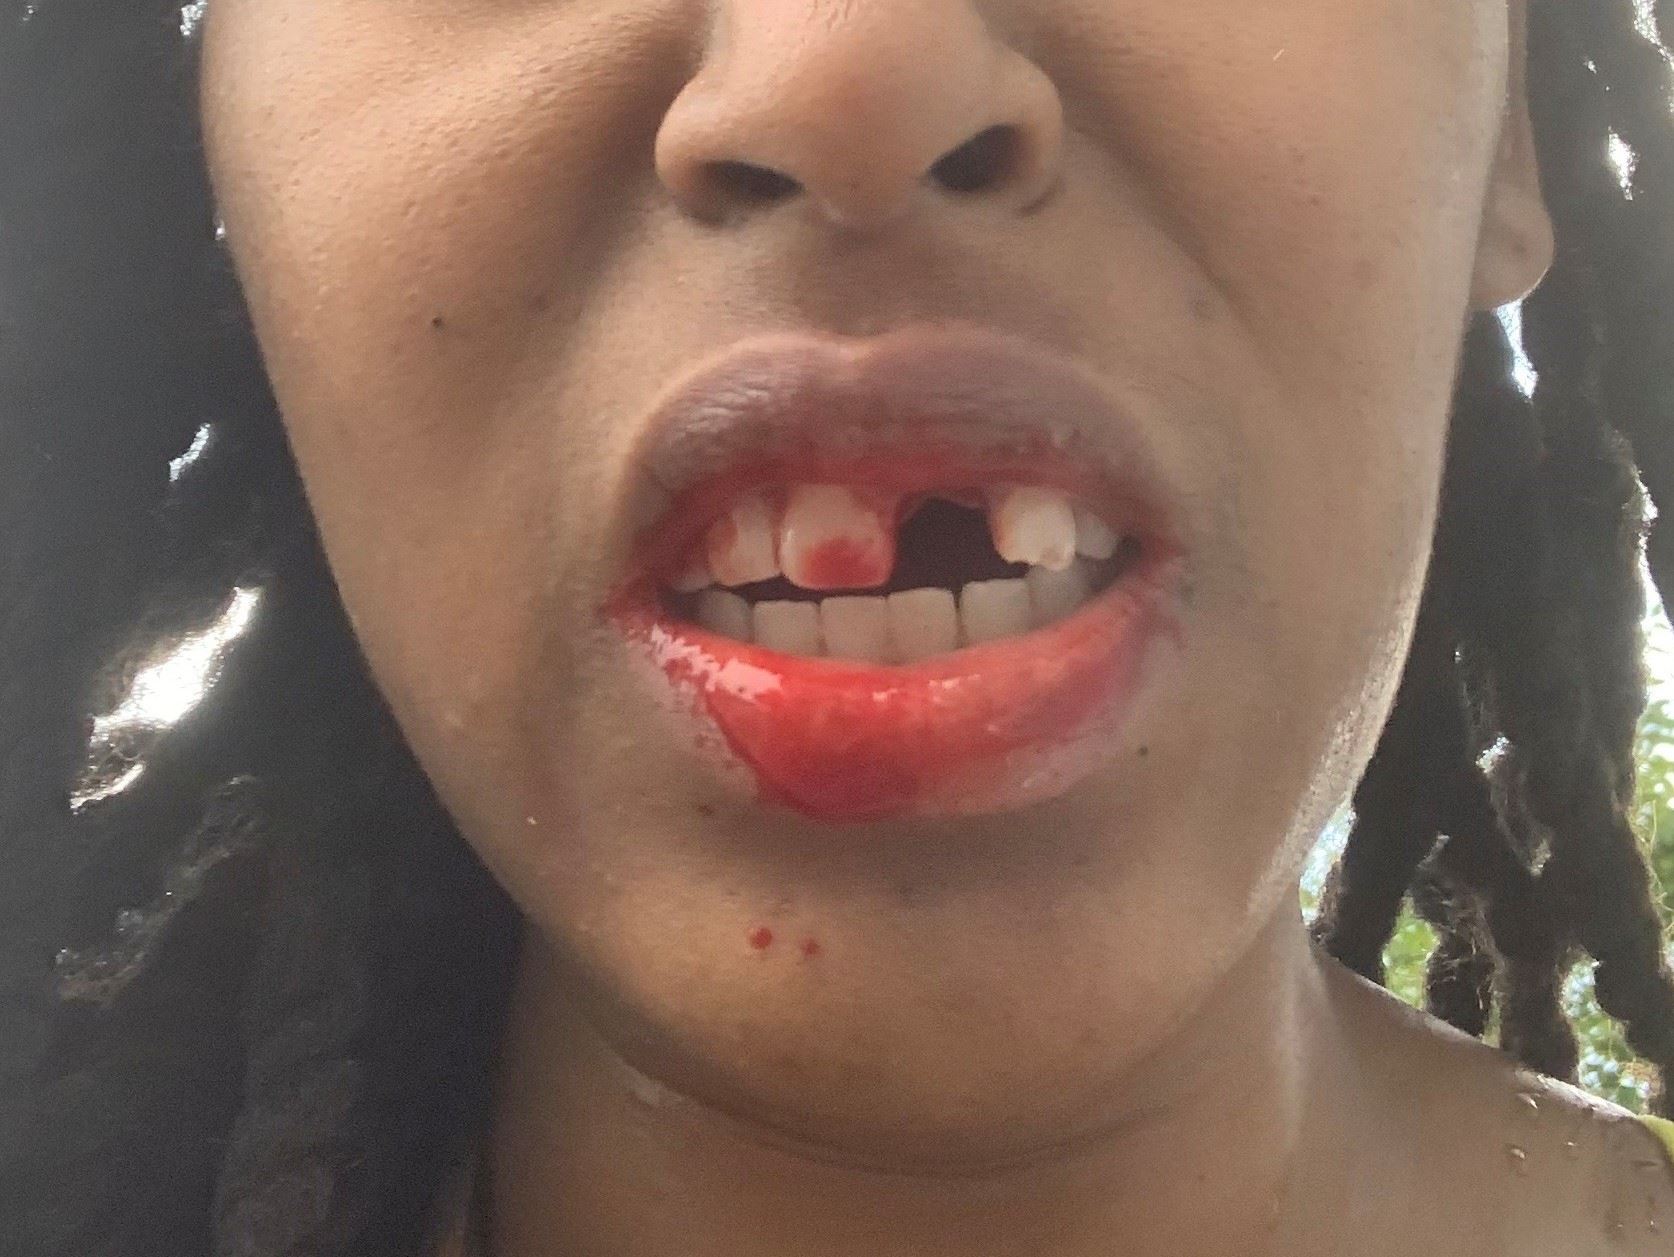 Close up image of a woman's mouth; tooth knocked out and blood on teeth and lips